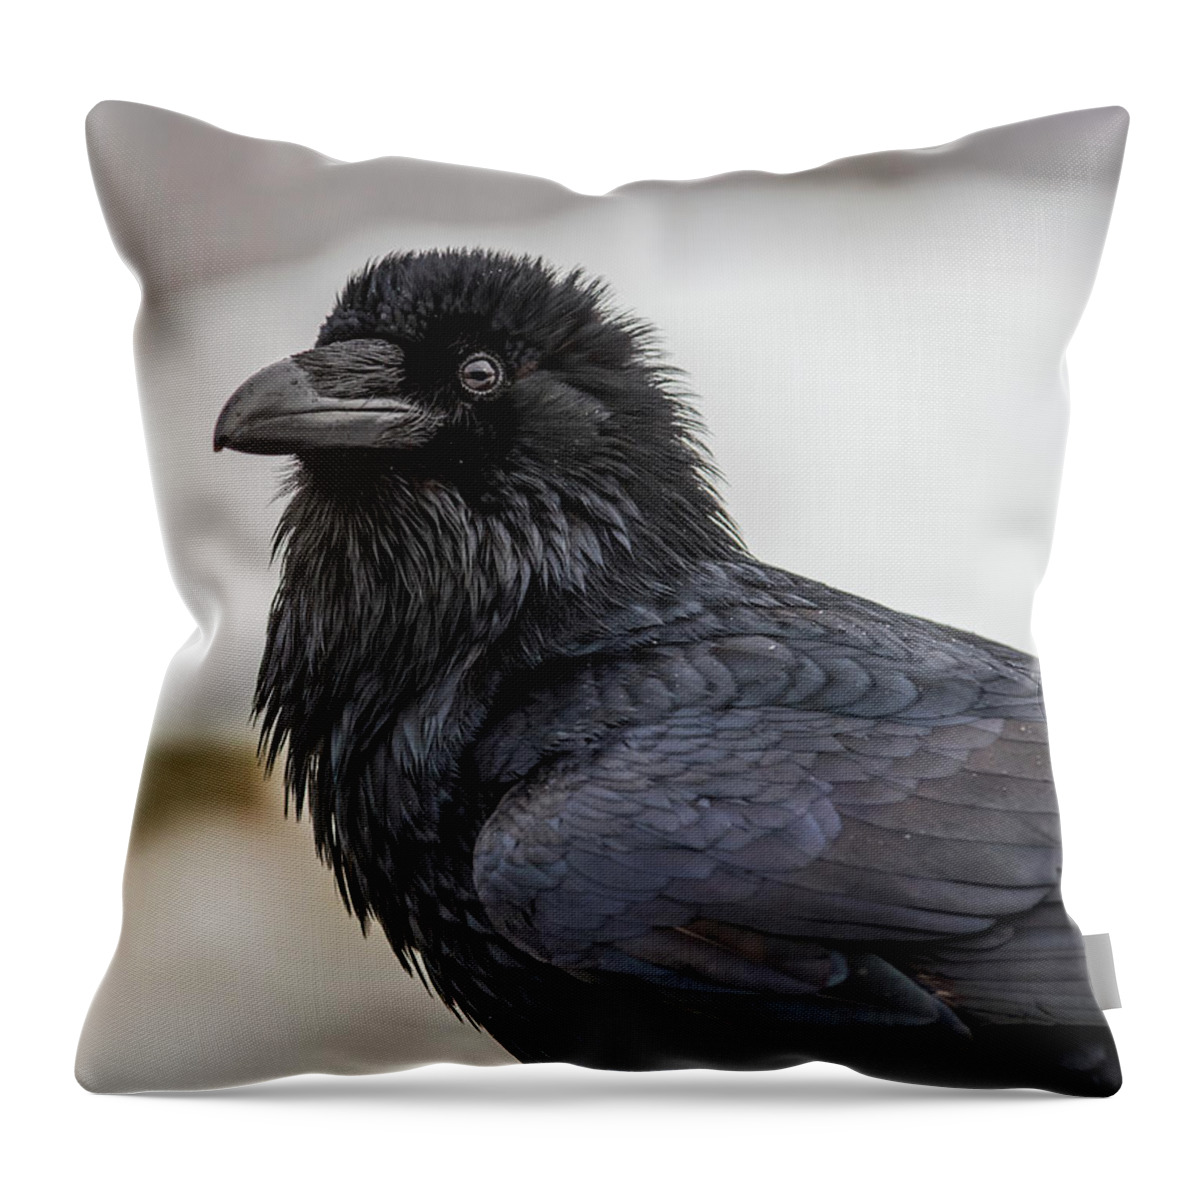 Raven Throw Pillow featuring the photograph Raven 4 by David Kirby